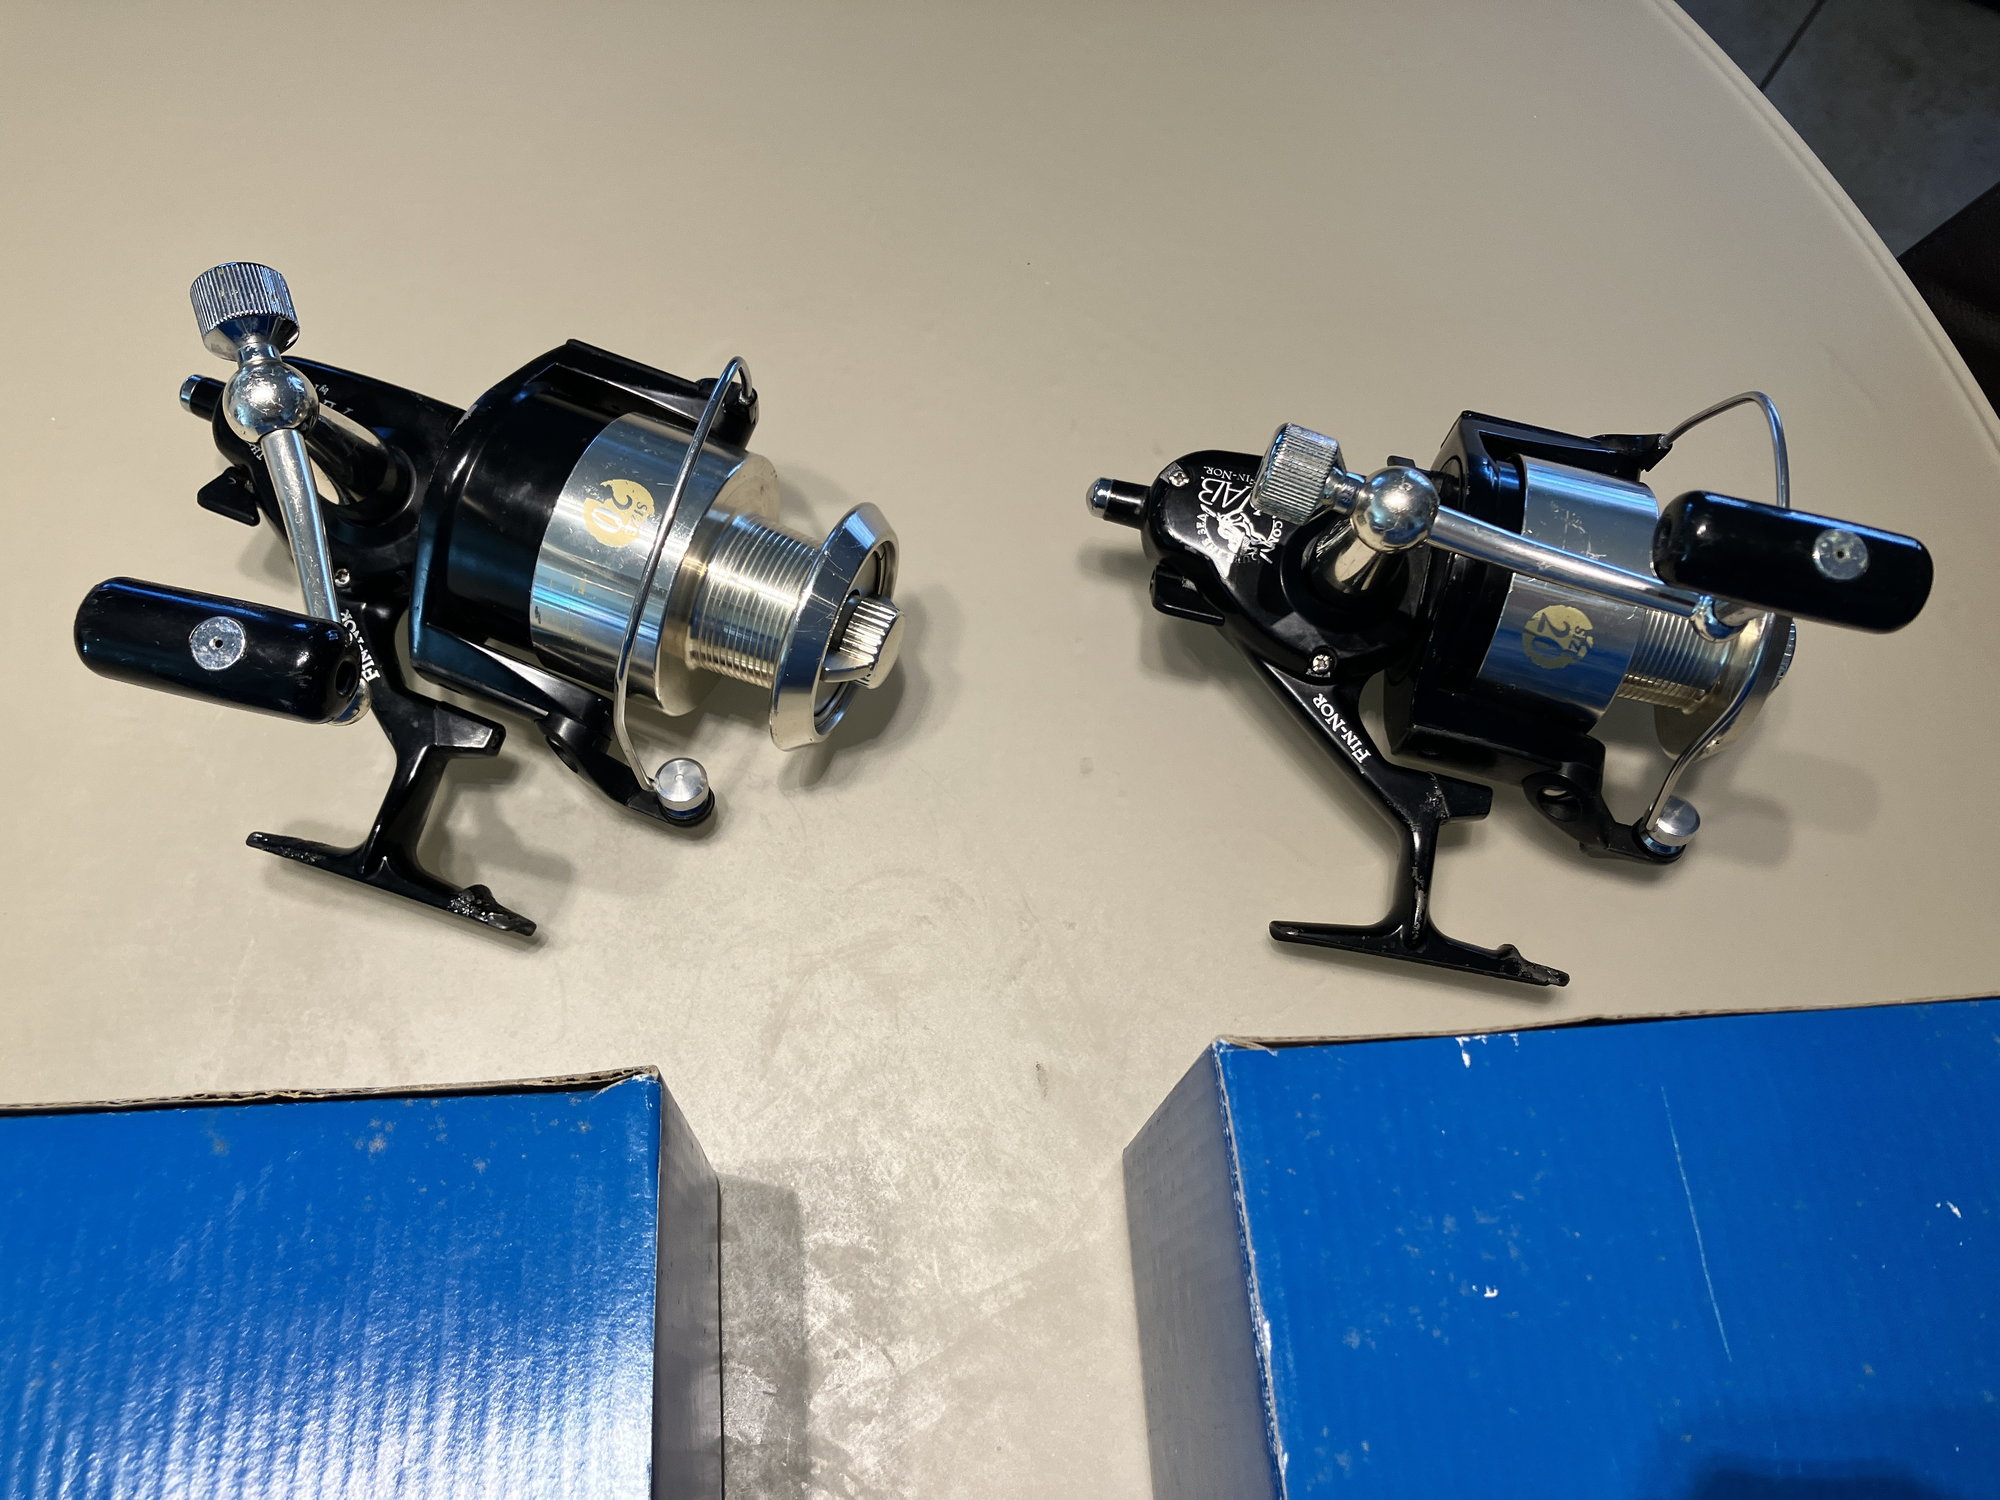 Fin-Nor Ahab 20 spinning reels and rods with original boxes. - The Hull  Truth - Boating and Fishing Forum